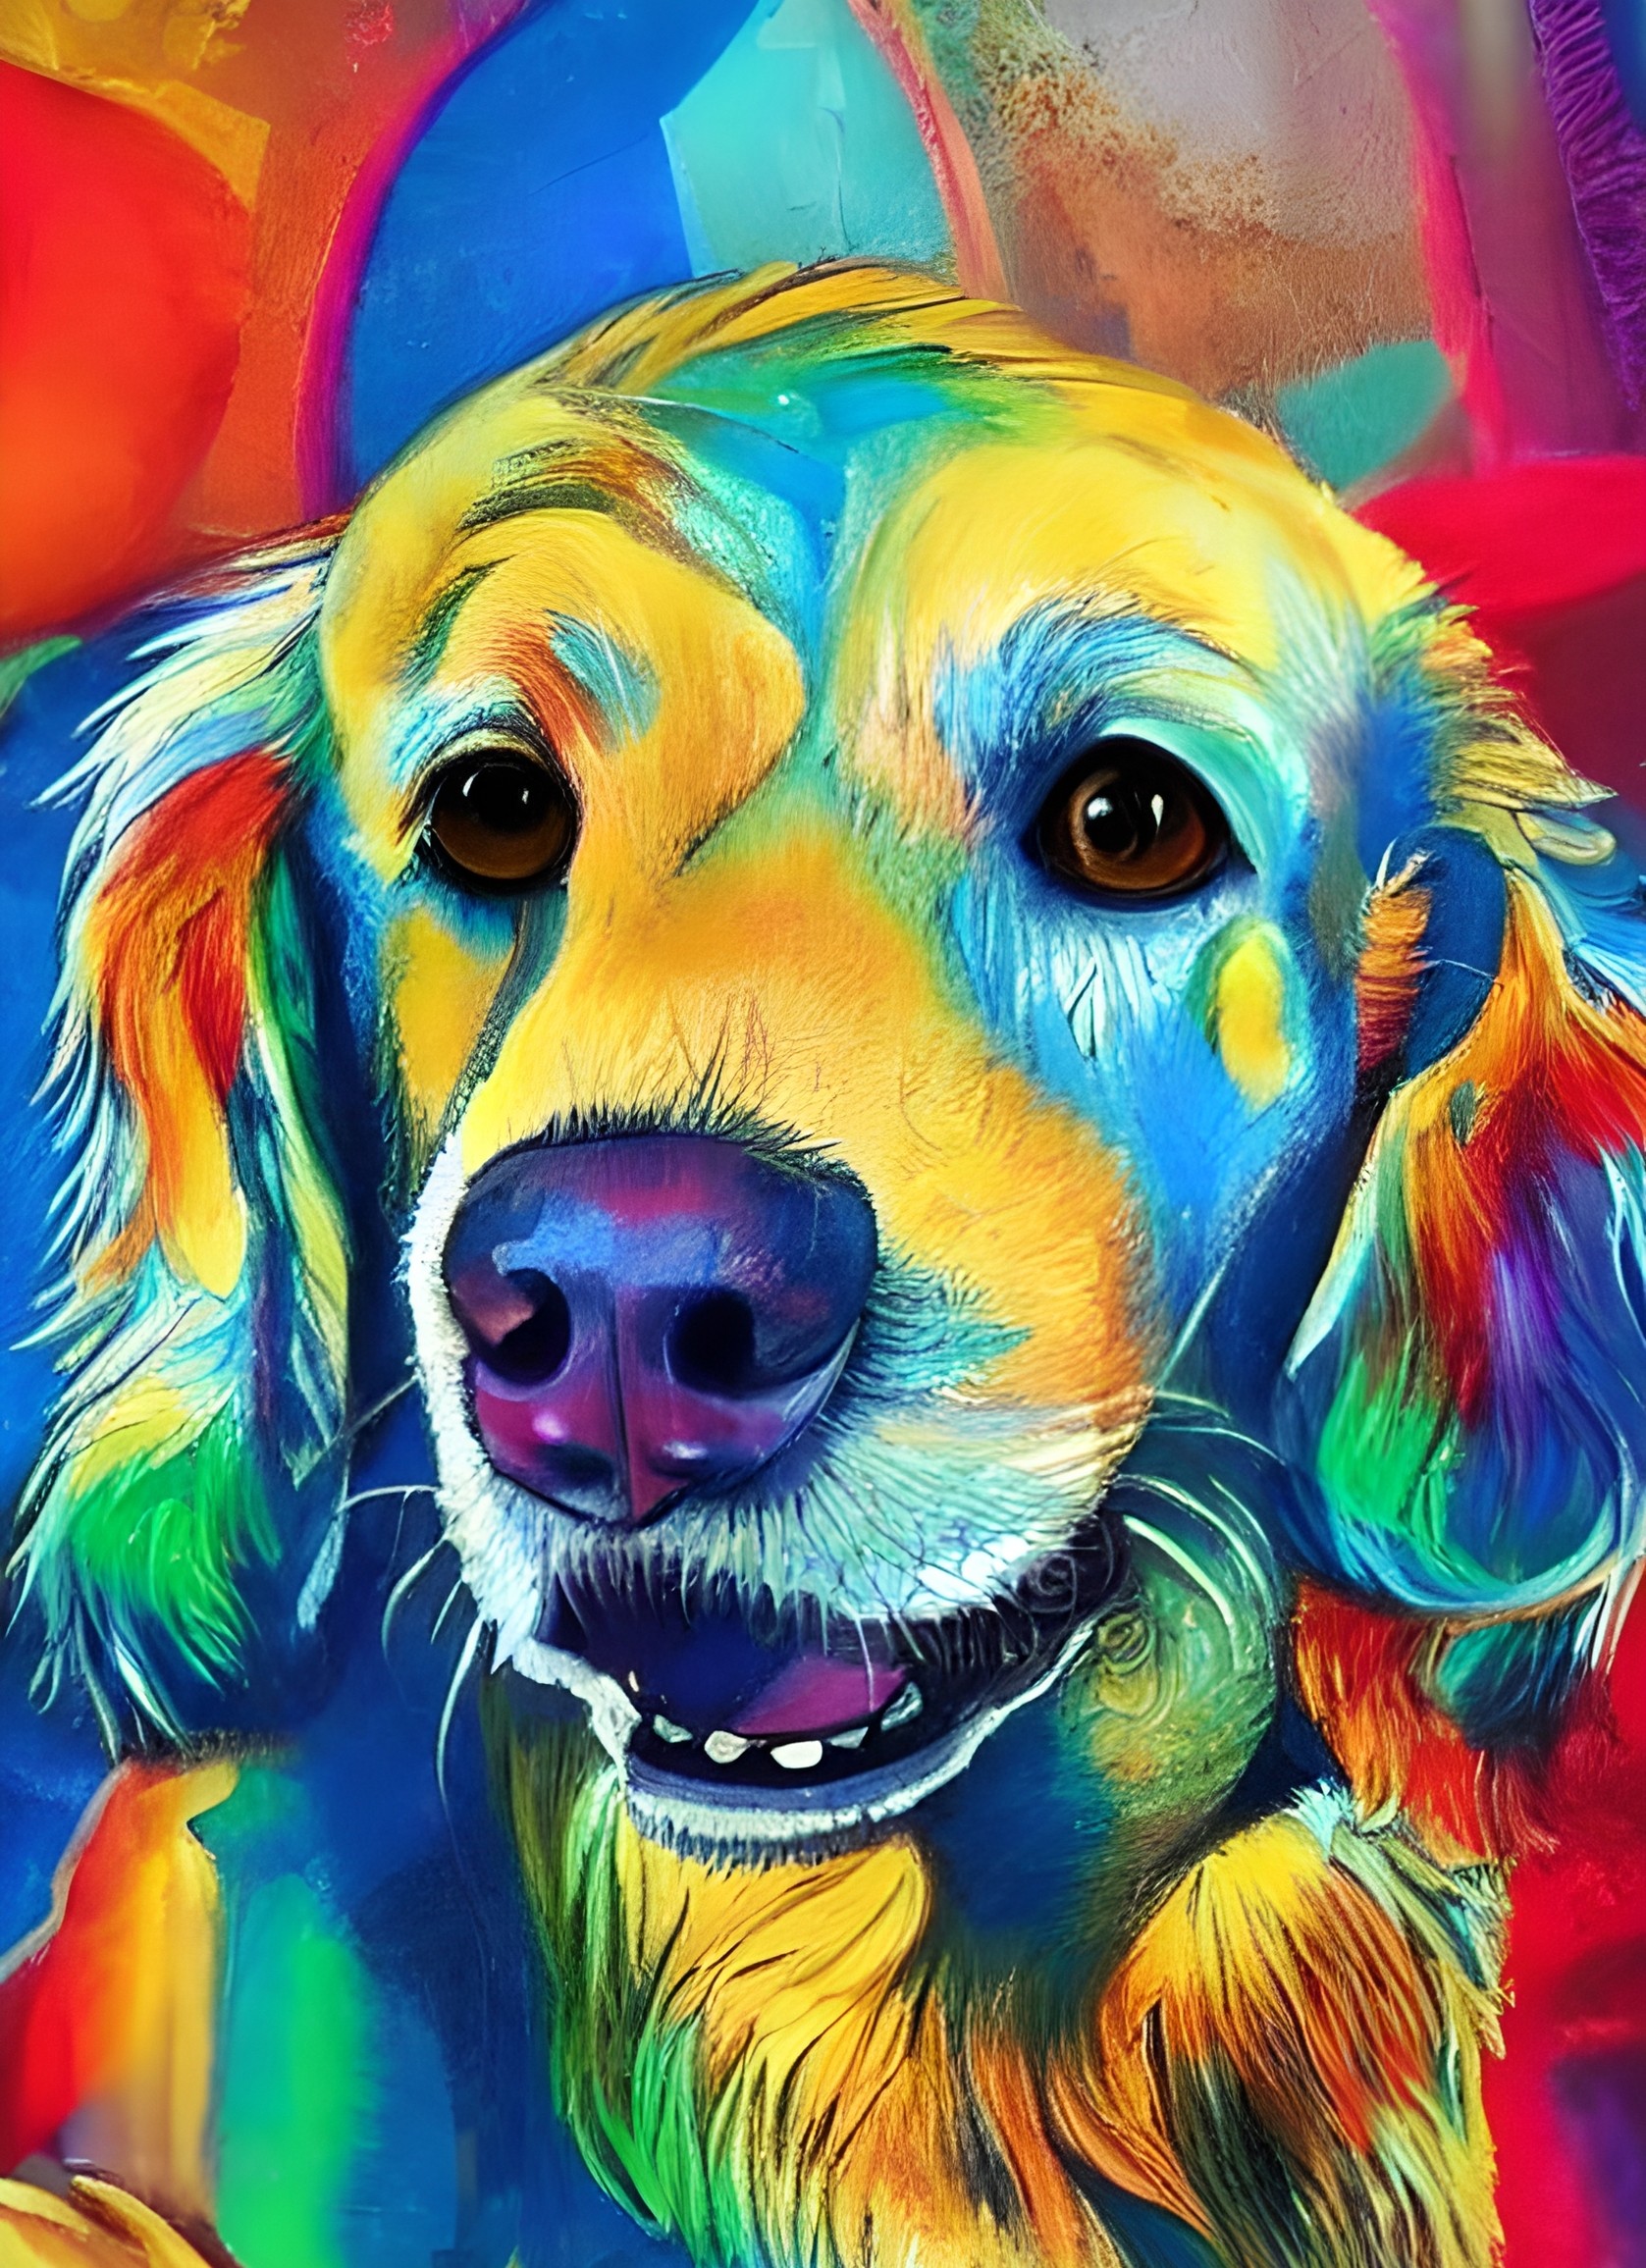 Golden Retriever Dog Colourful Abstract Art Blank Greeting Card